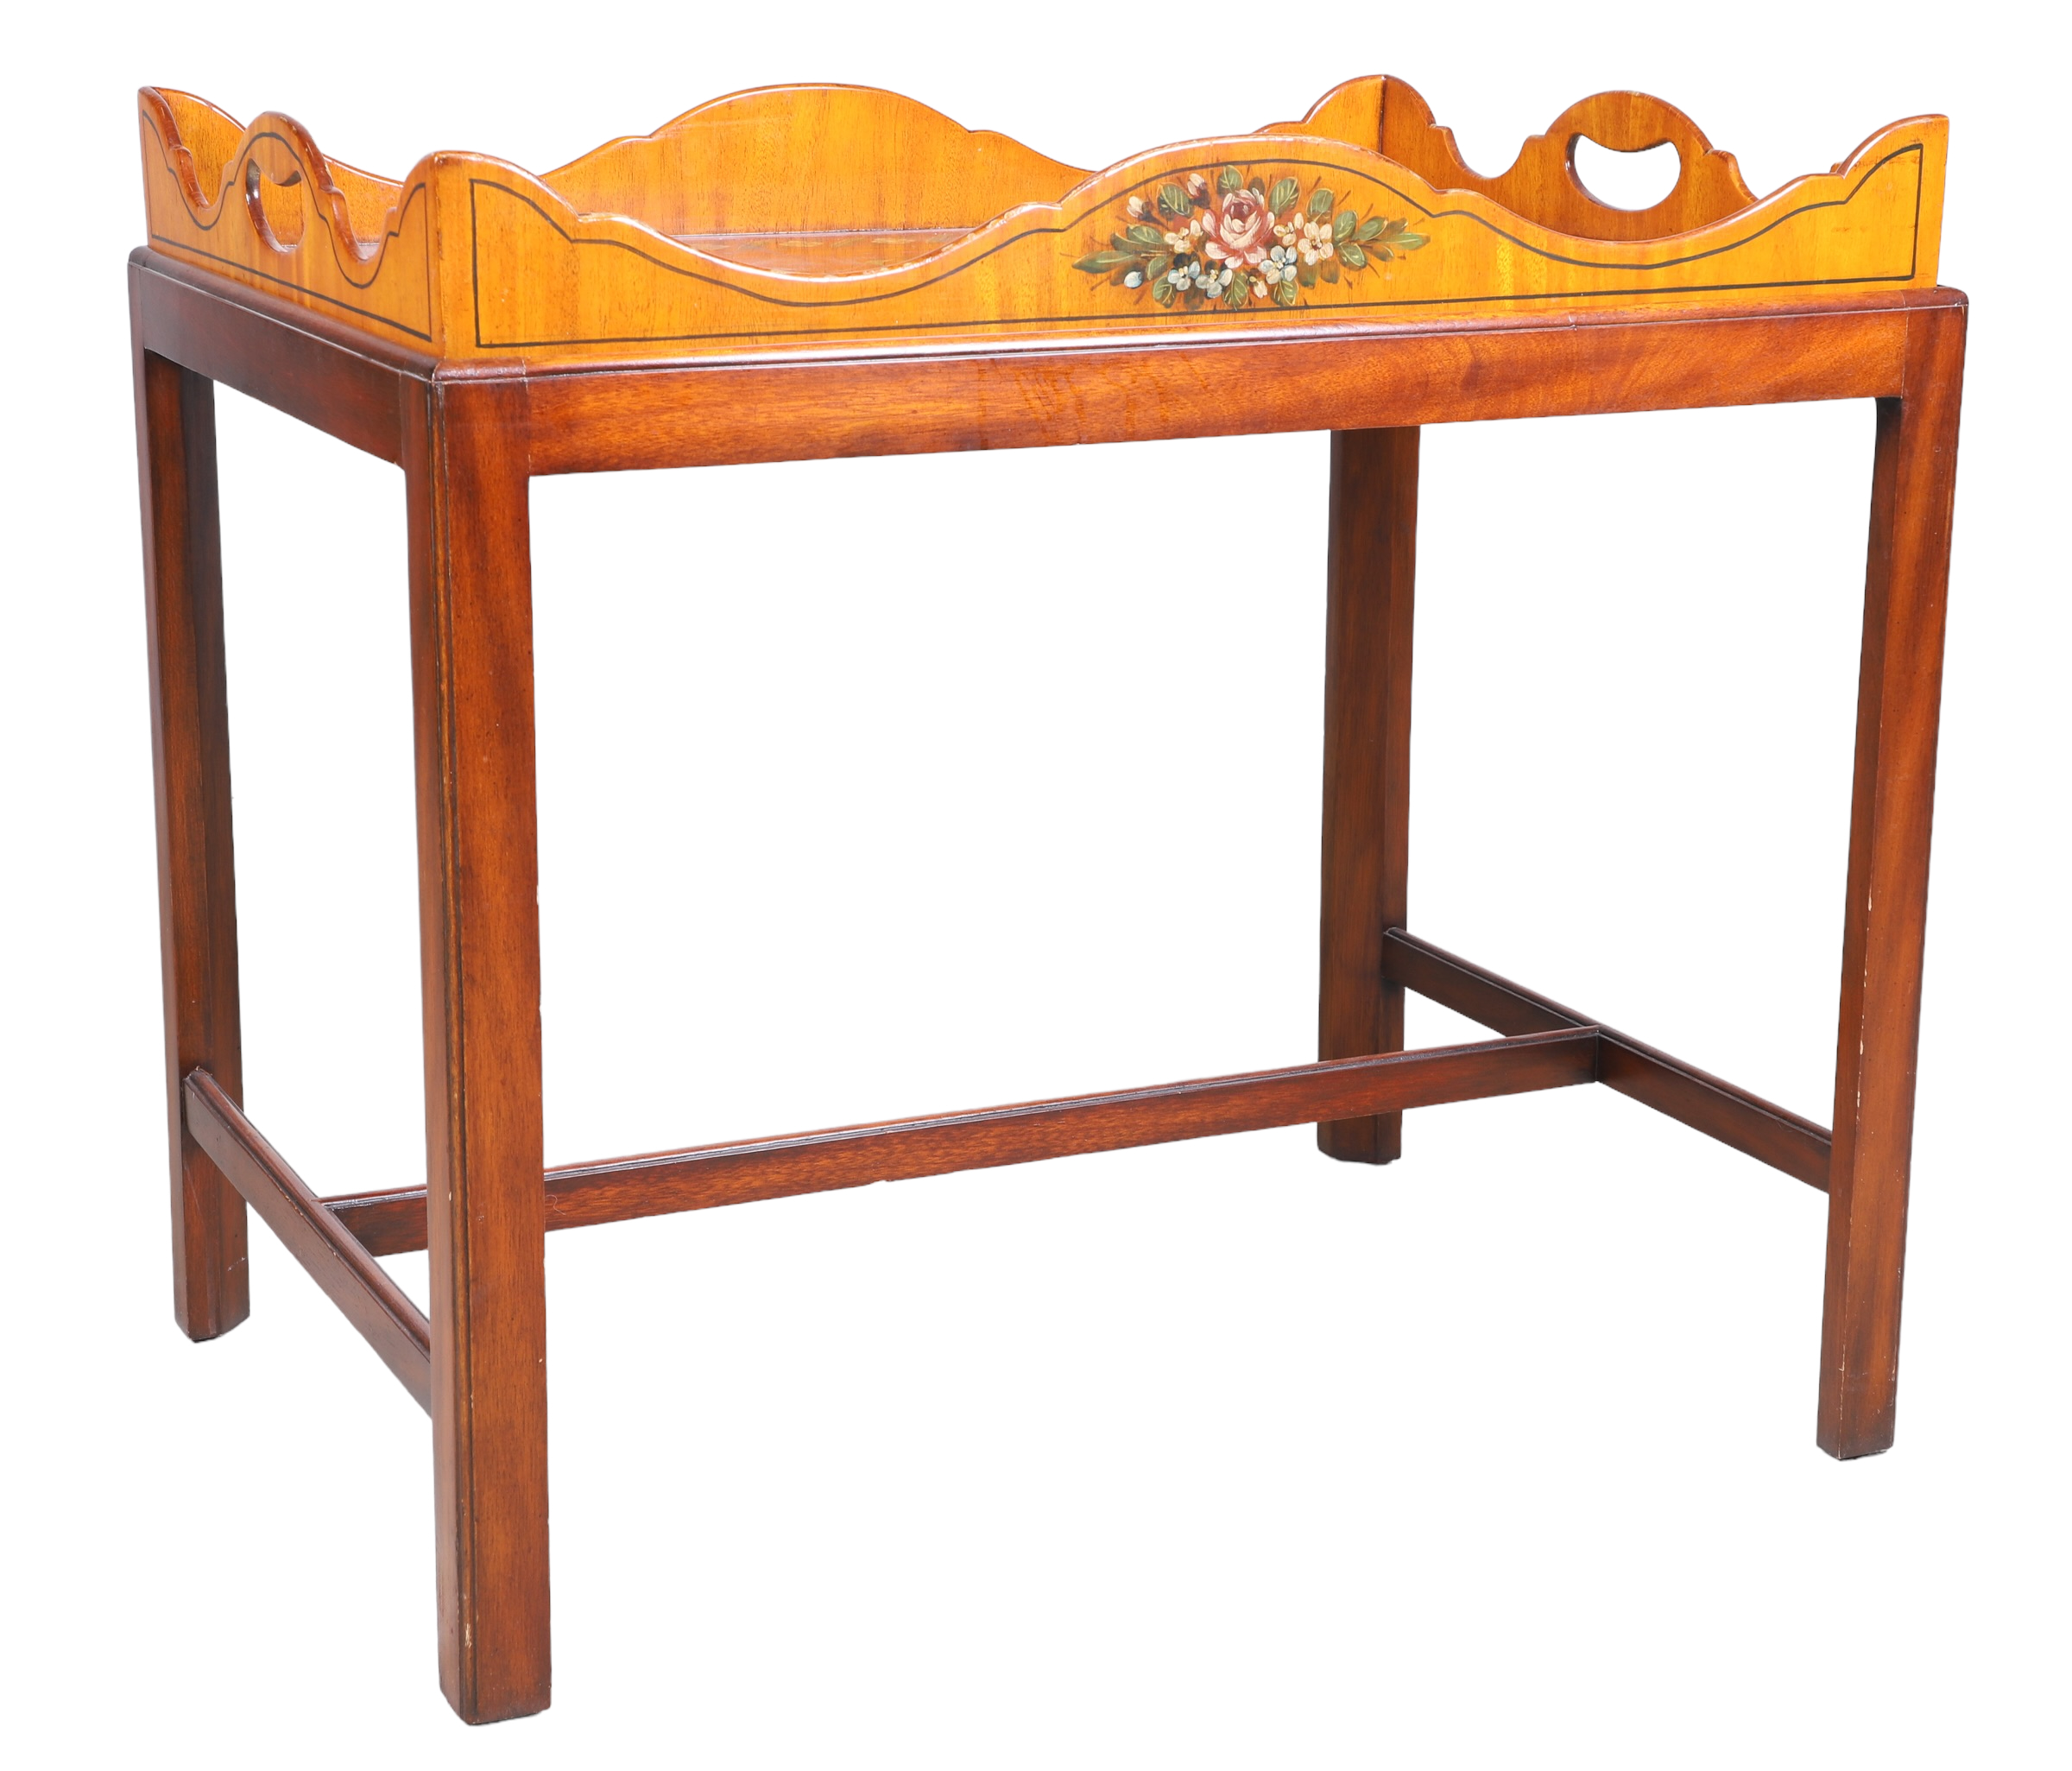 Chippendale style Inlaid butlers